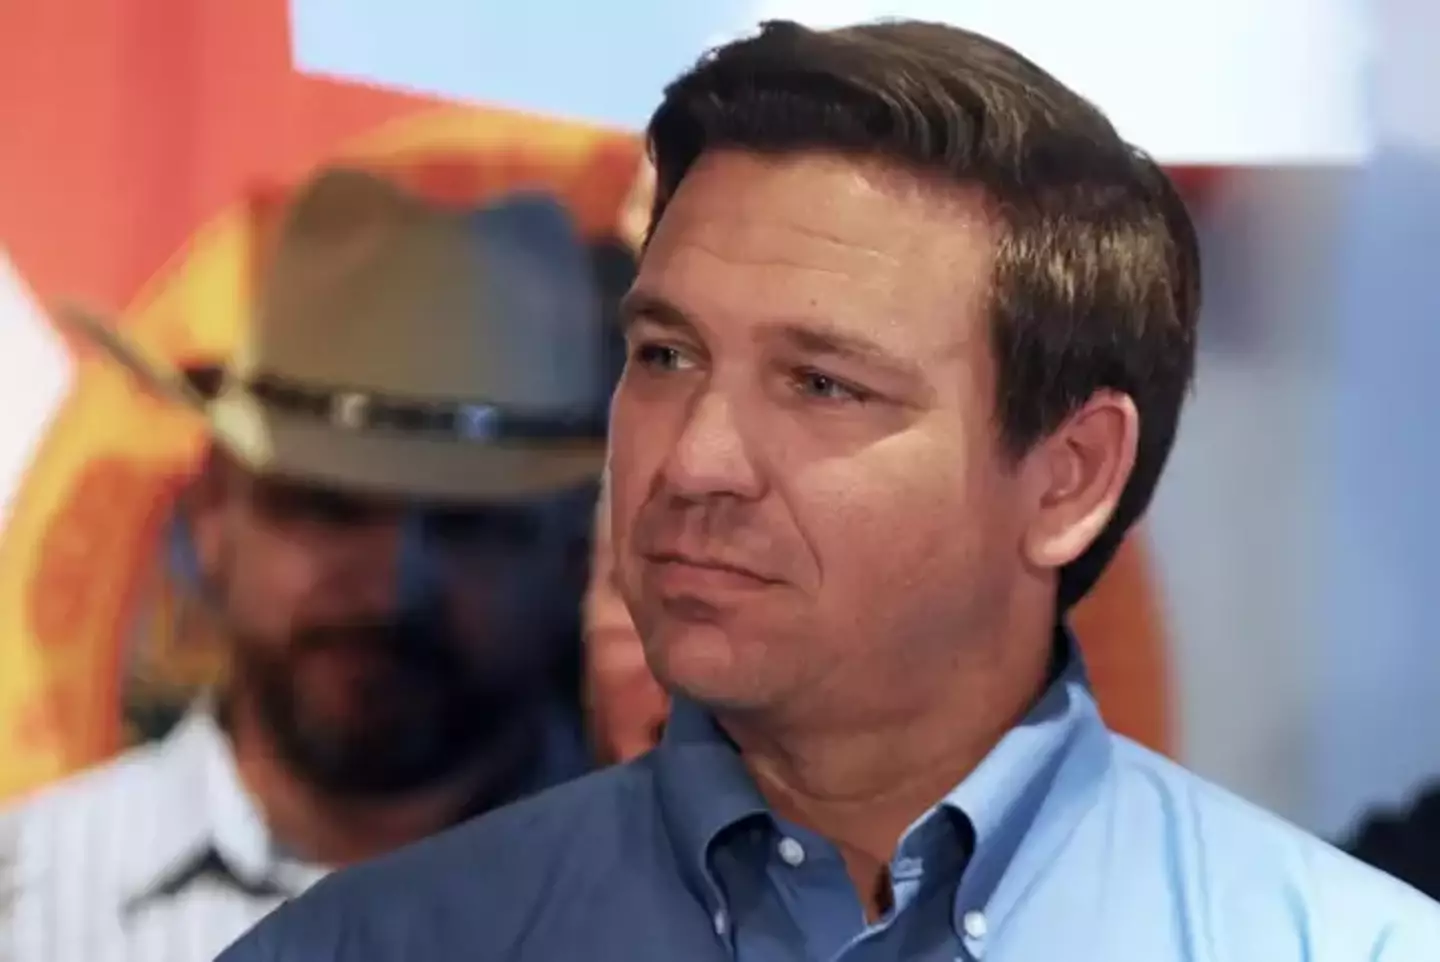 Ron DeSantis told customers in a bar that he'd 'serve them anything except Bud Light'.